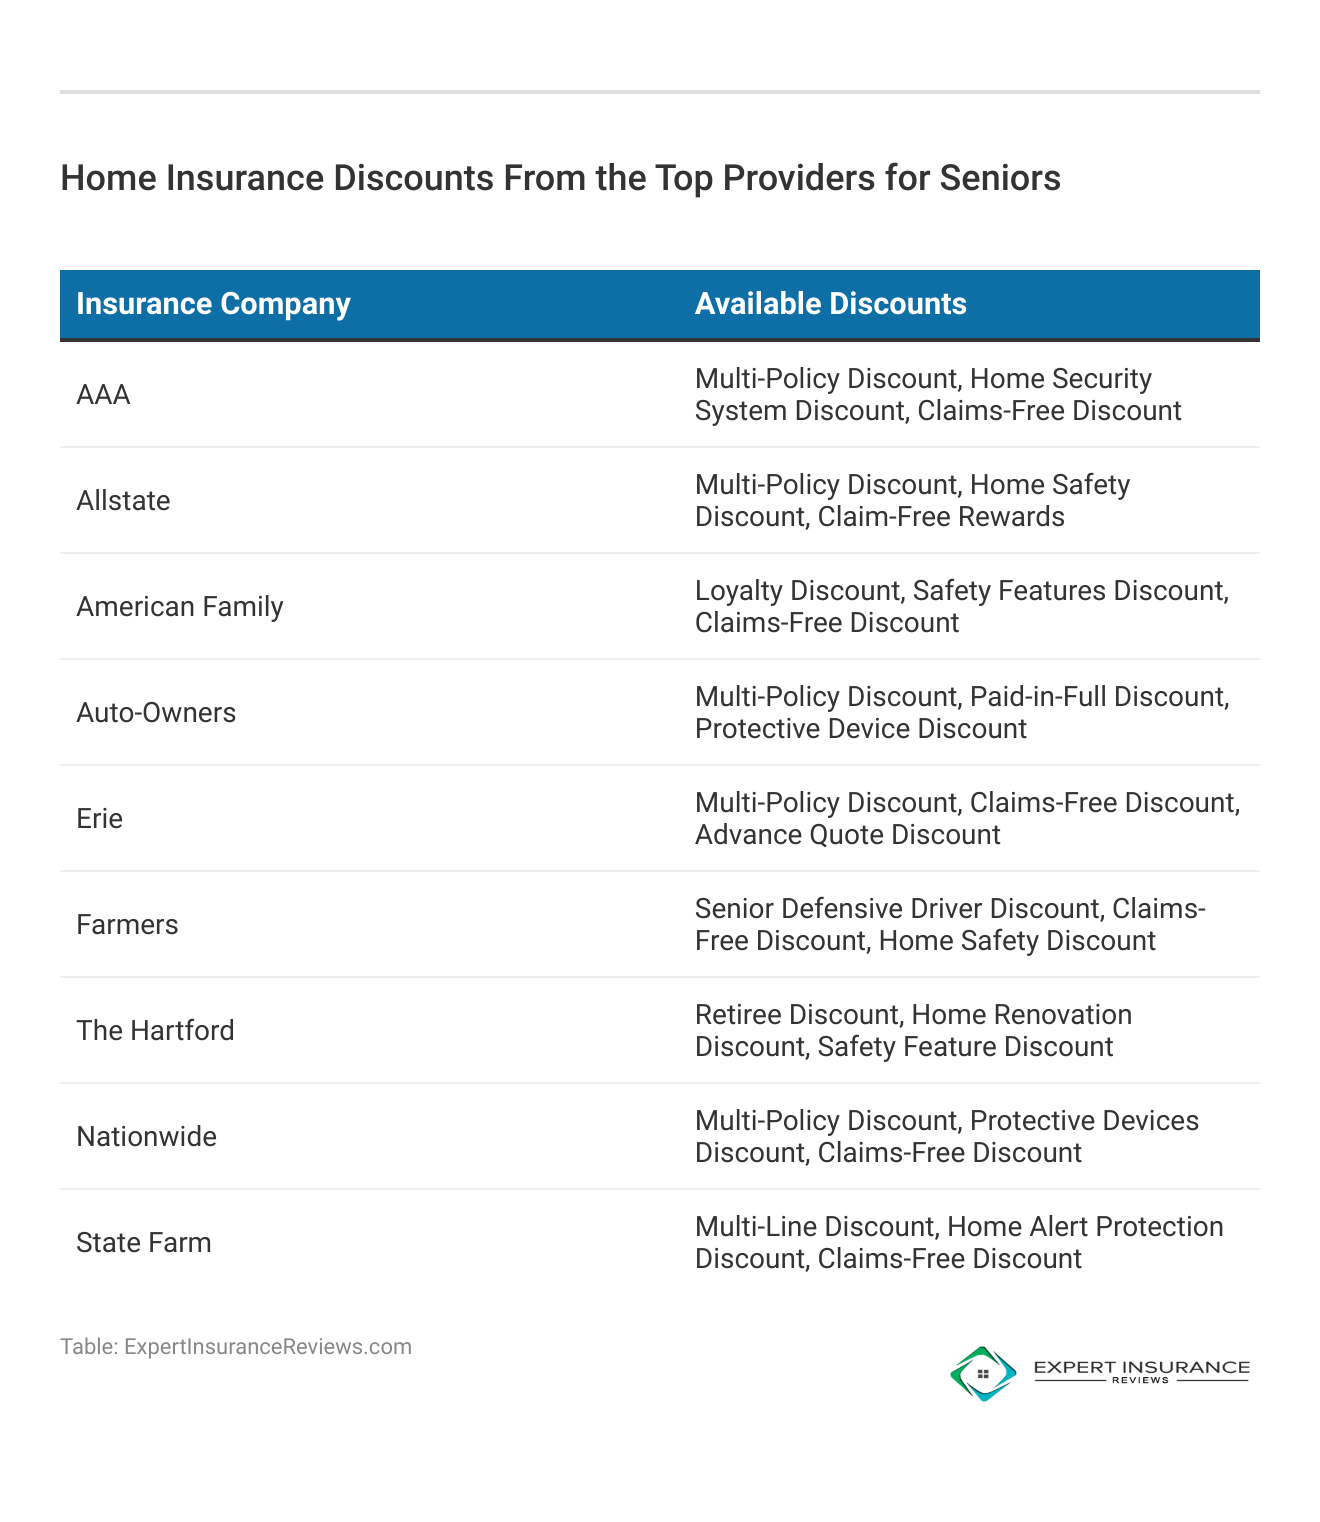 <h3>Home Insurance Discounts From the Top Providers for Seniors</h3> 